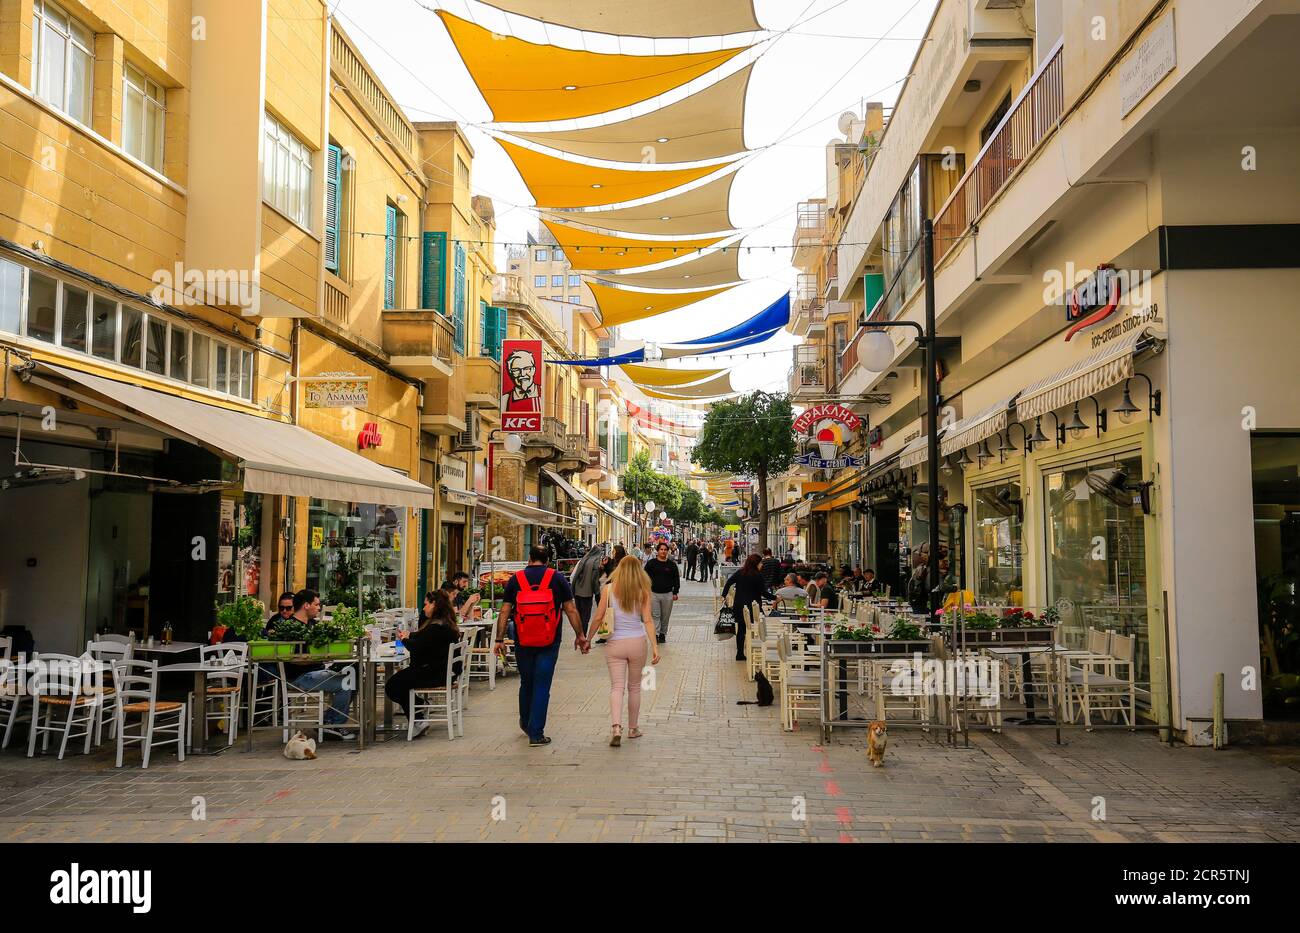 Nicosia, Cyprus - Shopping street in the Greek part of the divided city of Nicosia. Stock Photo